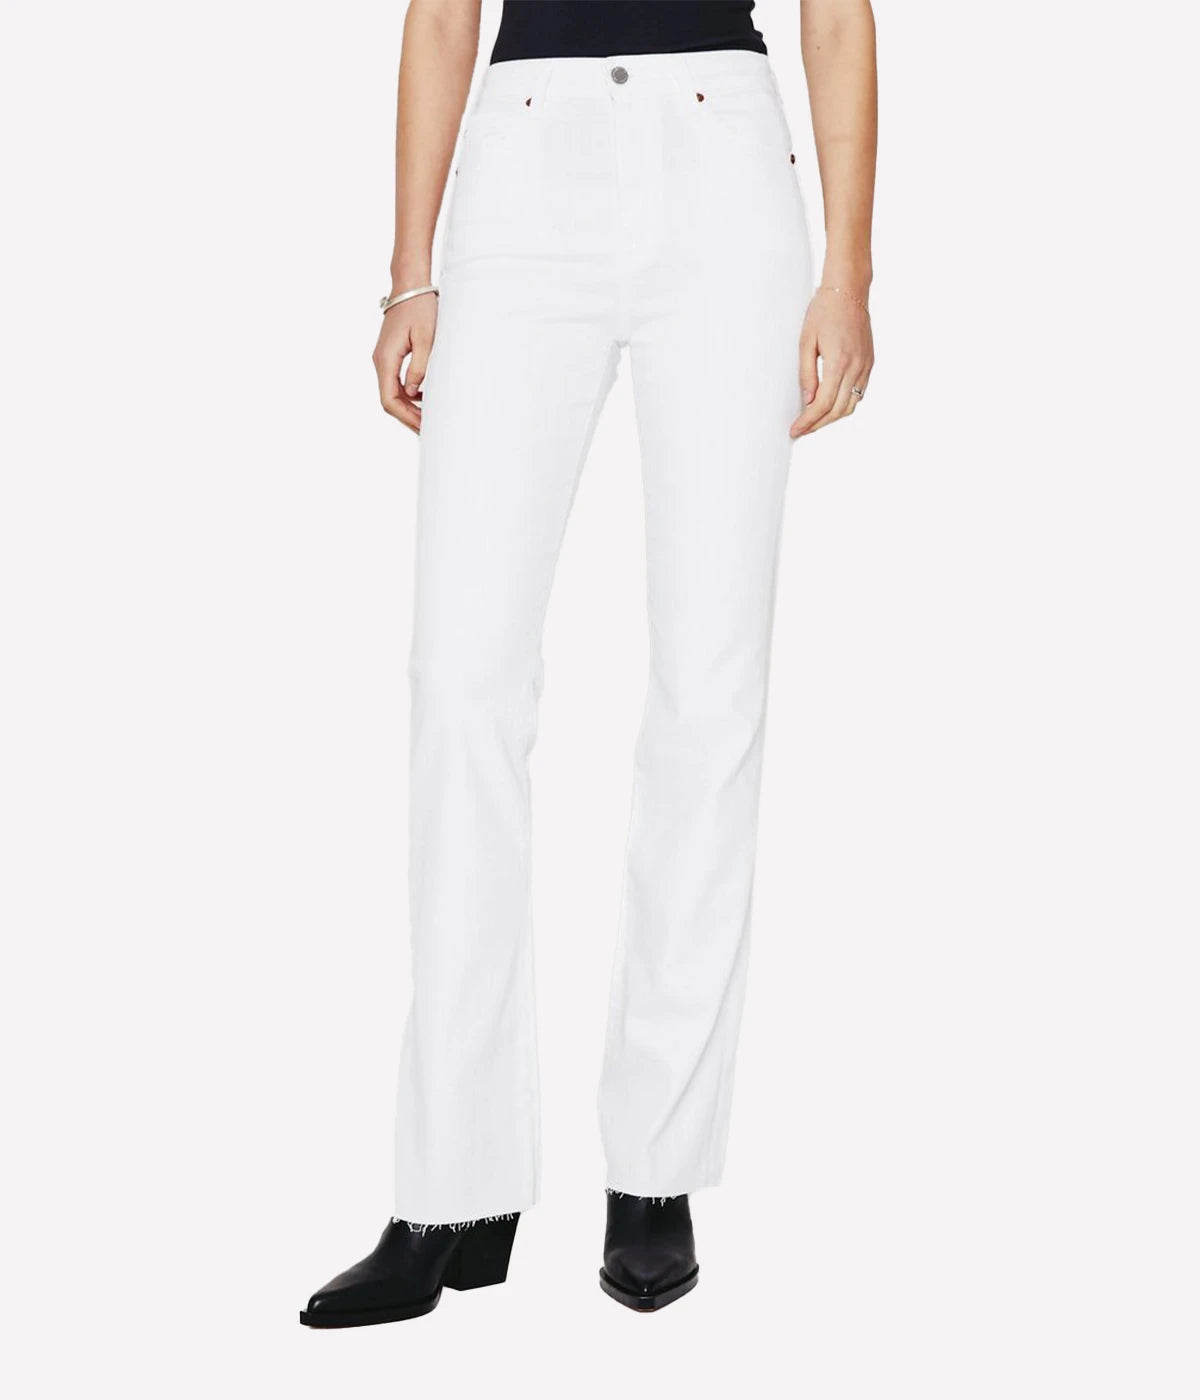 Image of a opaque white straight leg jean, with silver hardware, belt loop holes, button and fly fastening and raw hem details.   